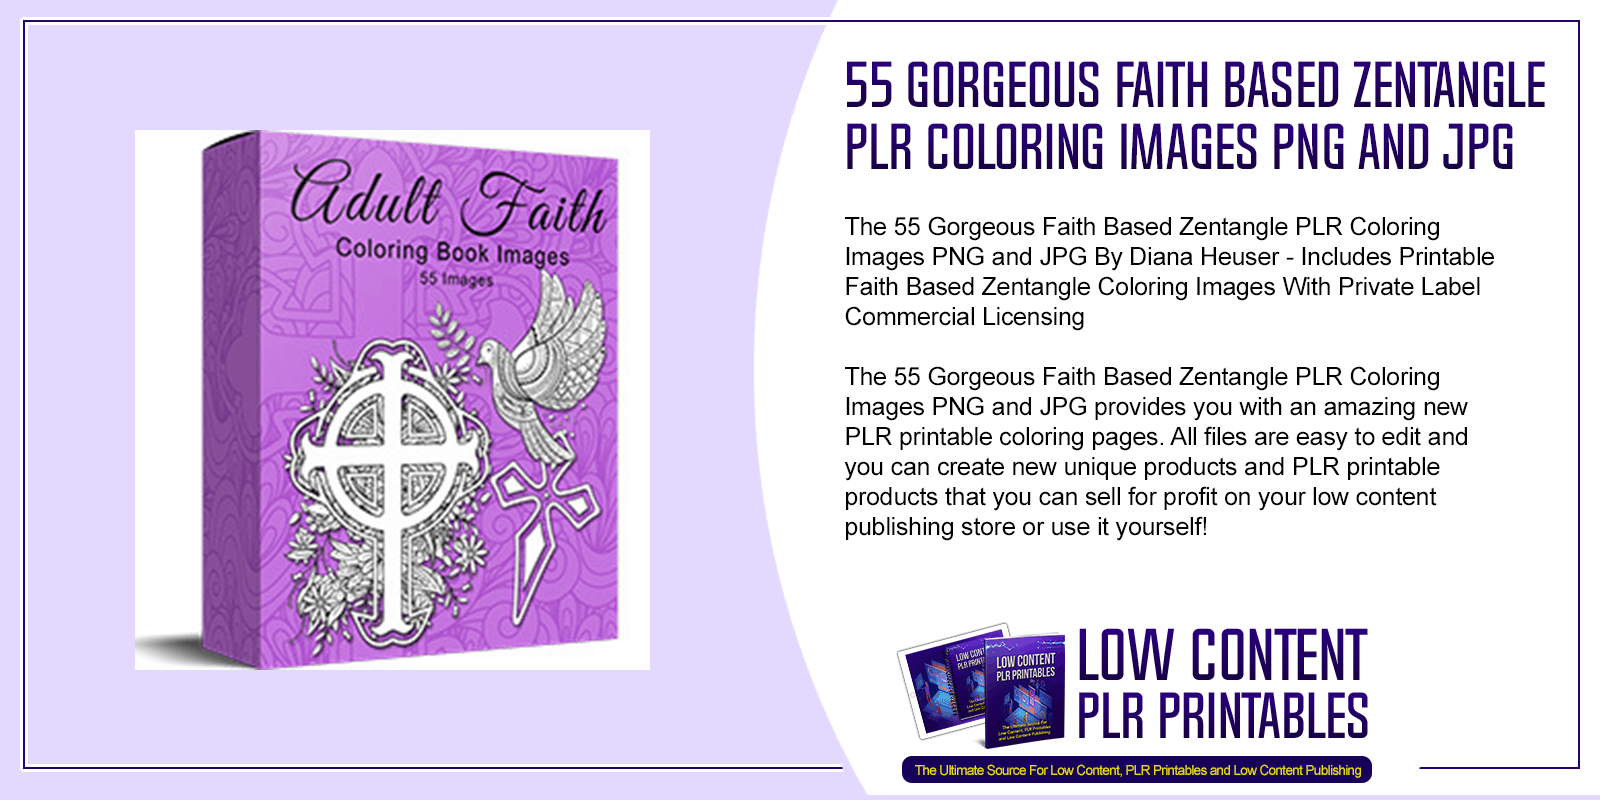 55 Gorgeous Faith Based Zentangle PLR Coloring Images PNG and JPG